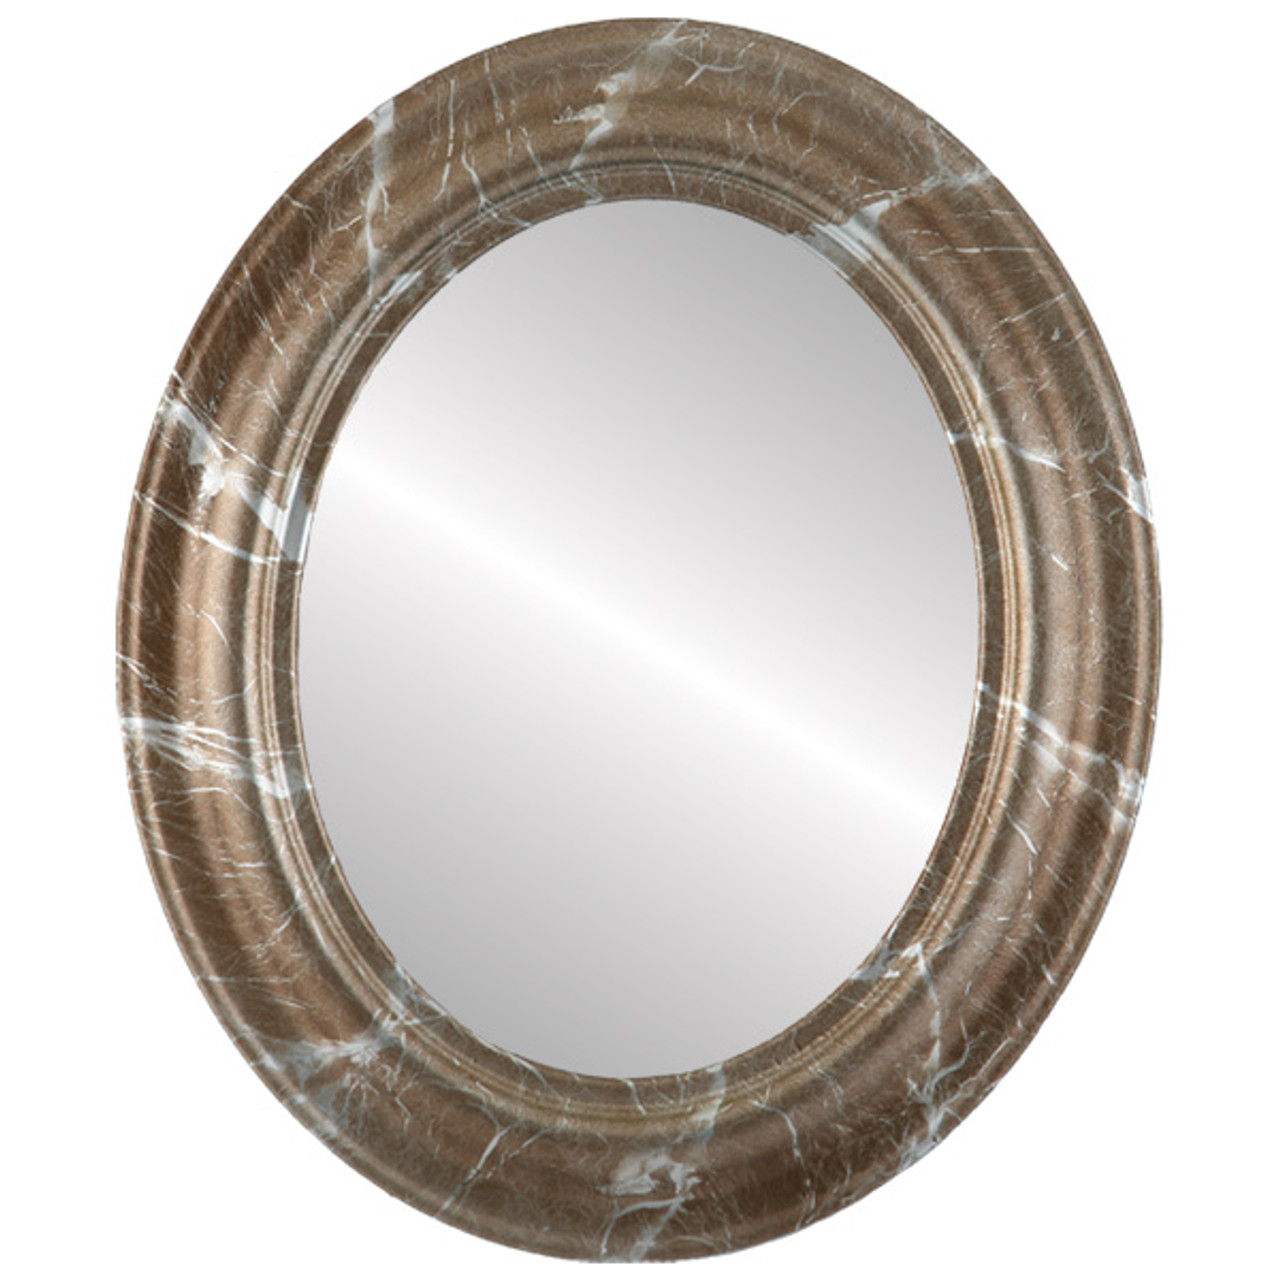 Contemporary Silver Oval Mirrors from $142 Free Shipping